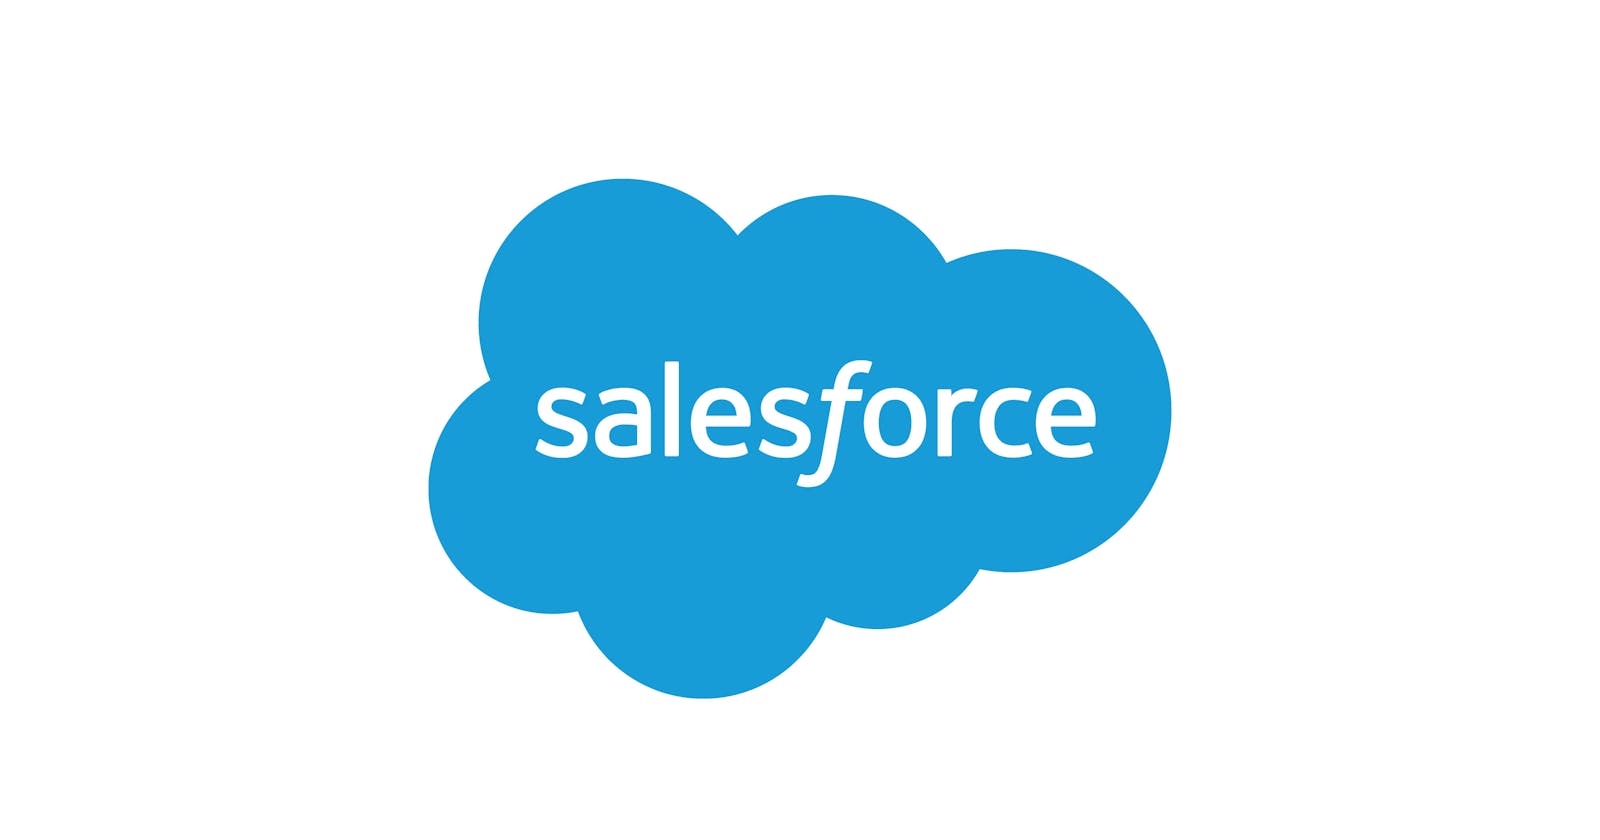 What is Salesforce & How to Get Started with Salesforce?